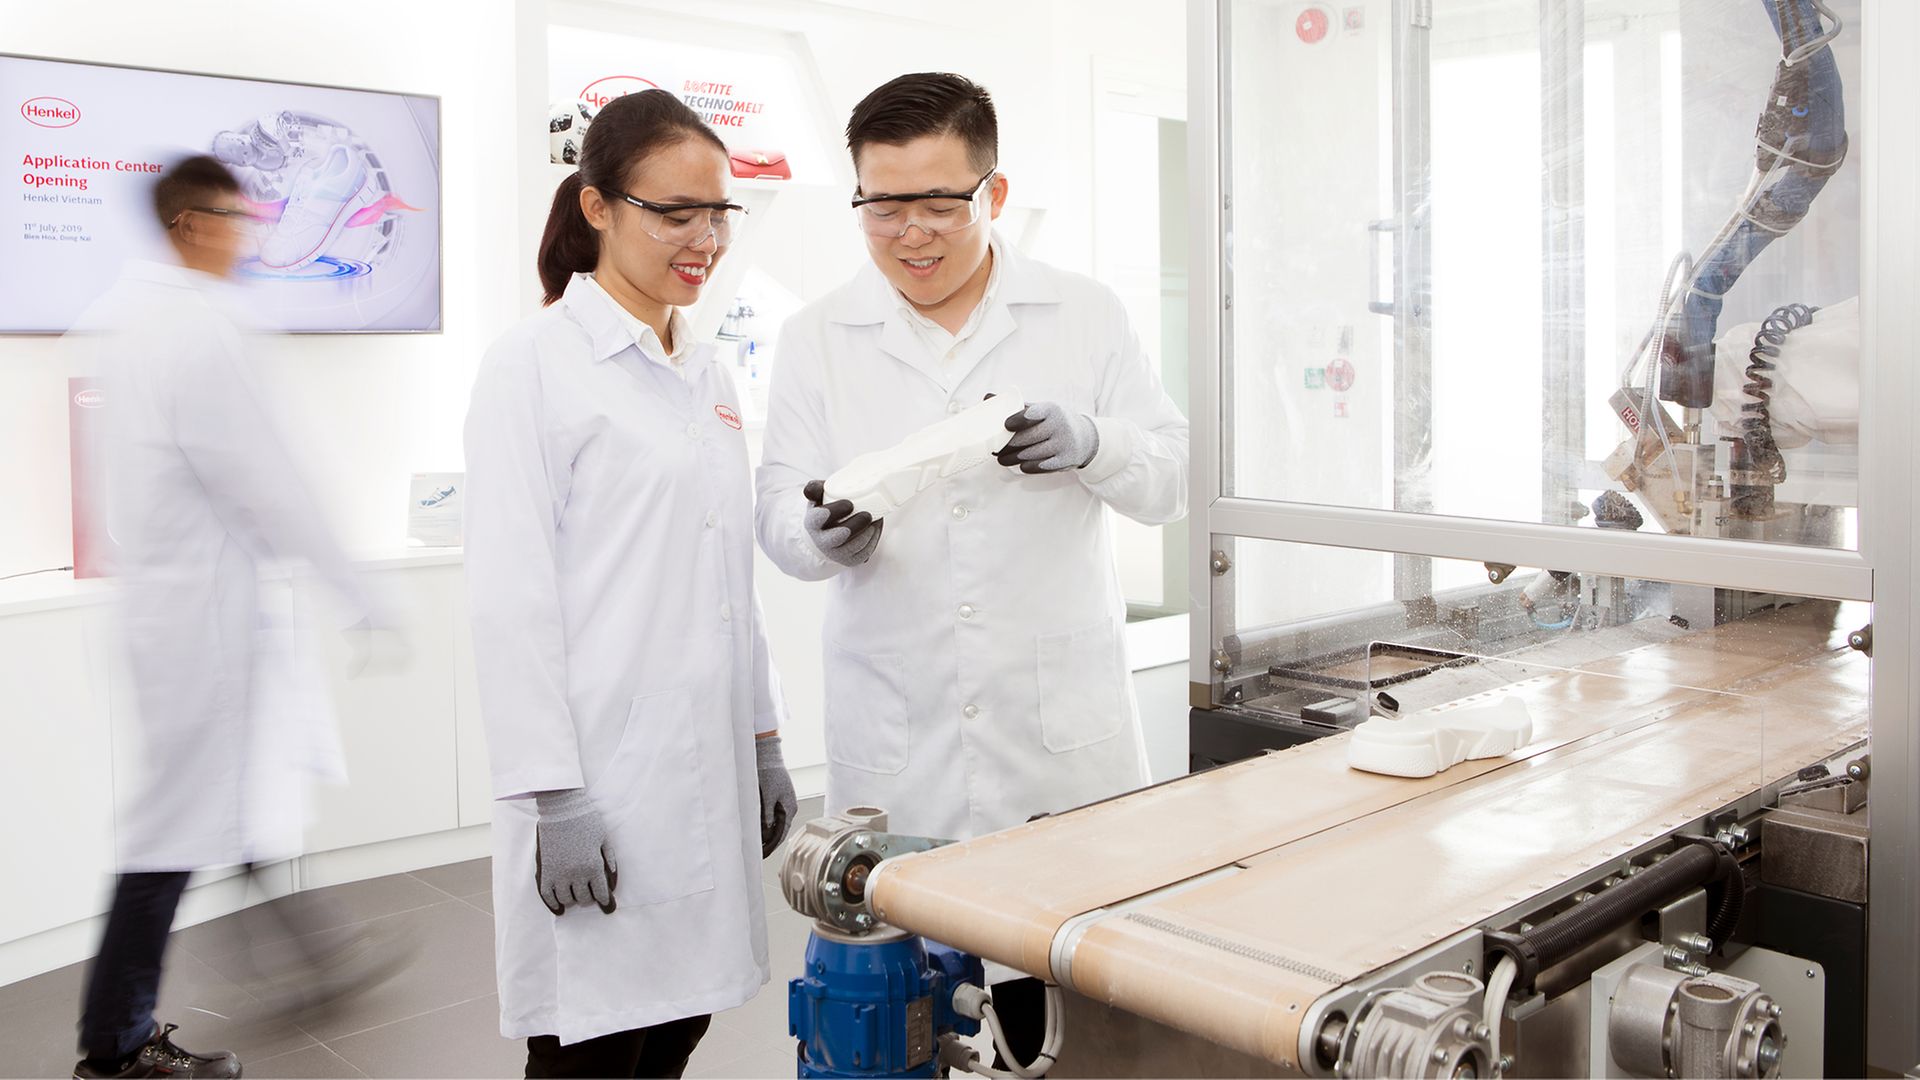 Since 2019, customers have been testing automated adhesive solutions in Henkel’s Application Center in Bien Hoa, Vietnam.